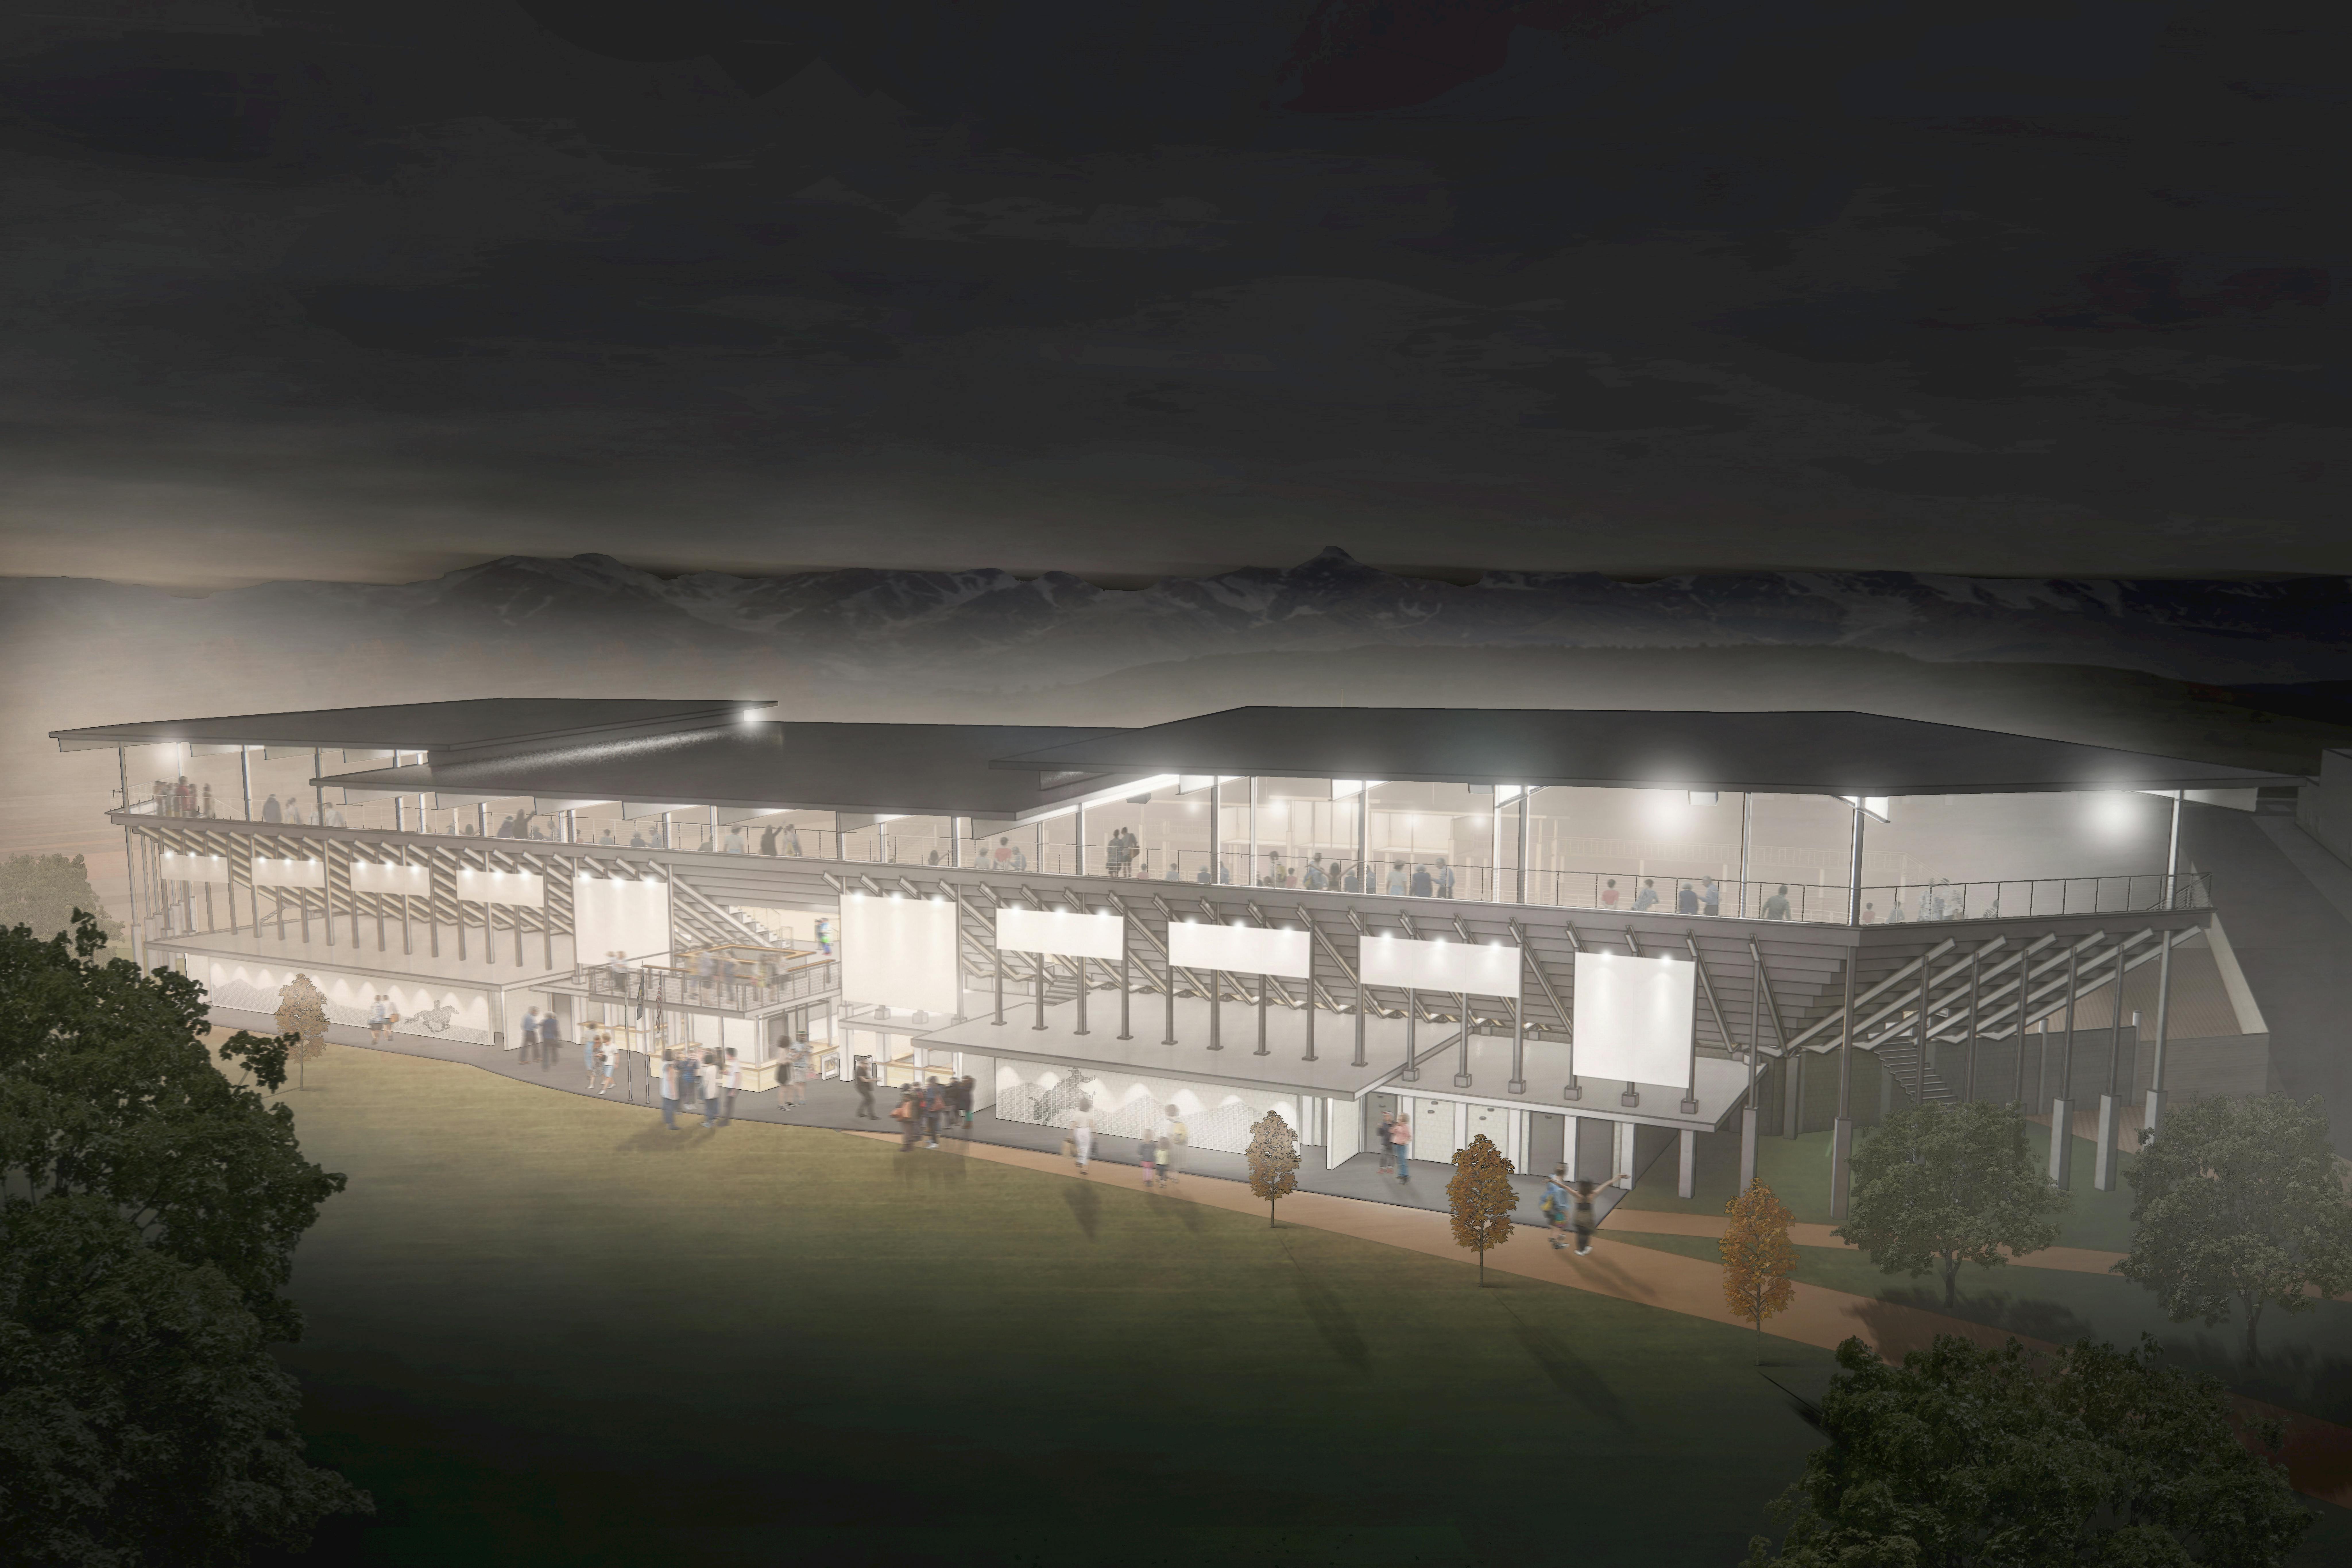 A rendering of the full rodeo arena building lit up at night.